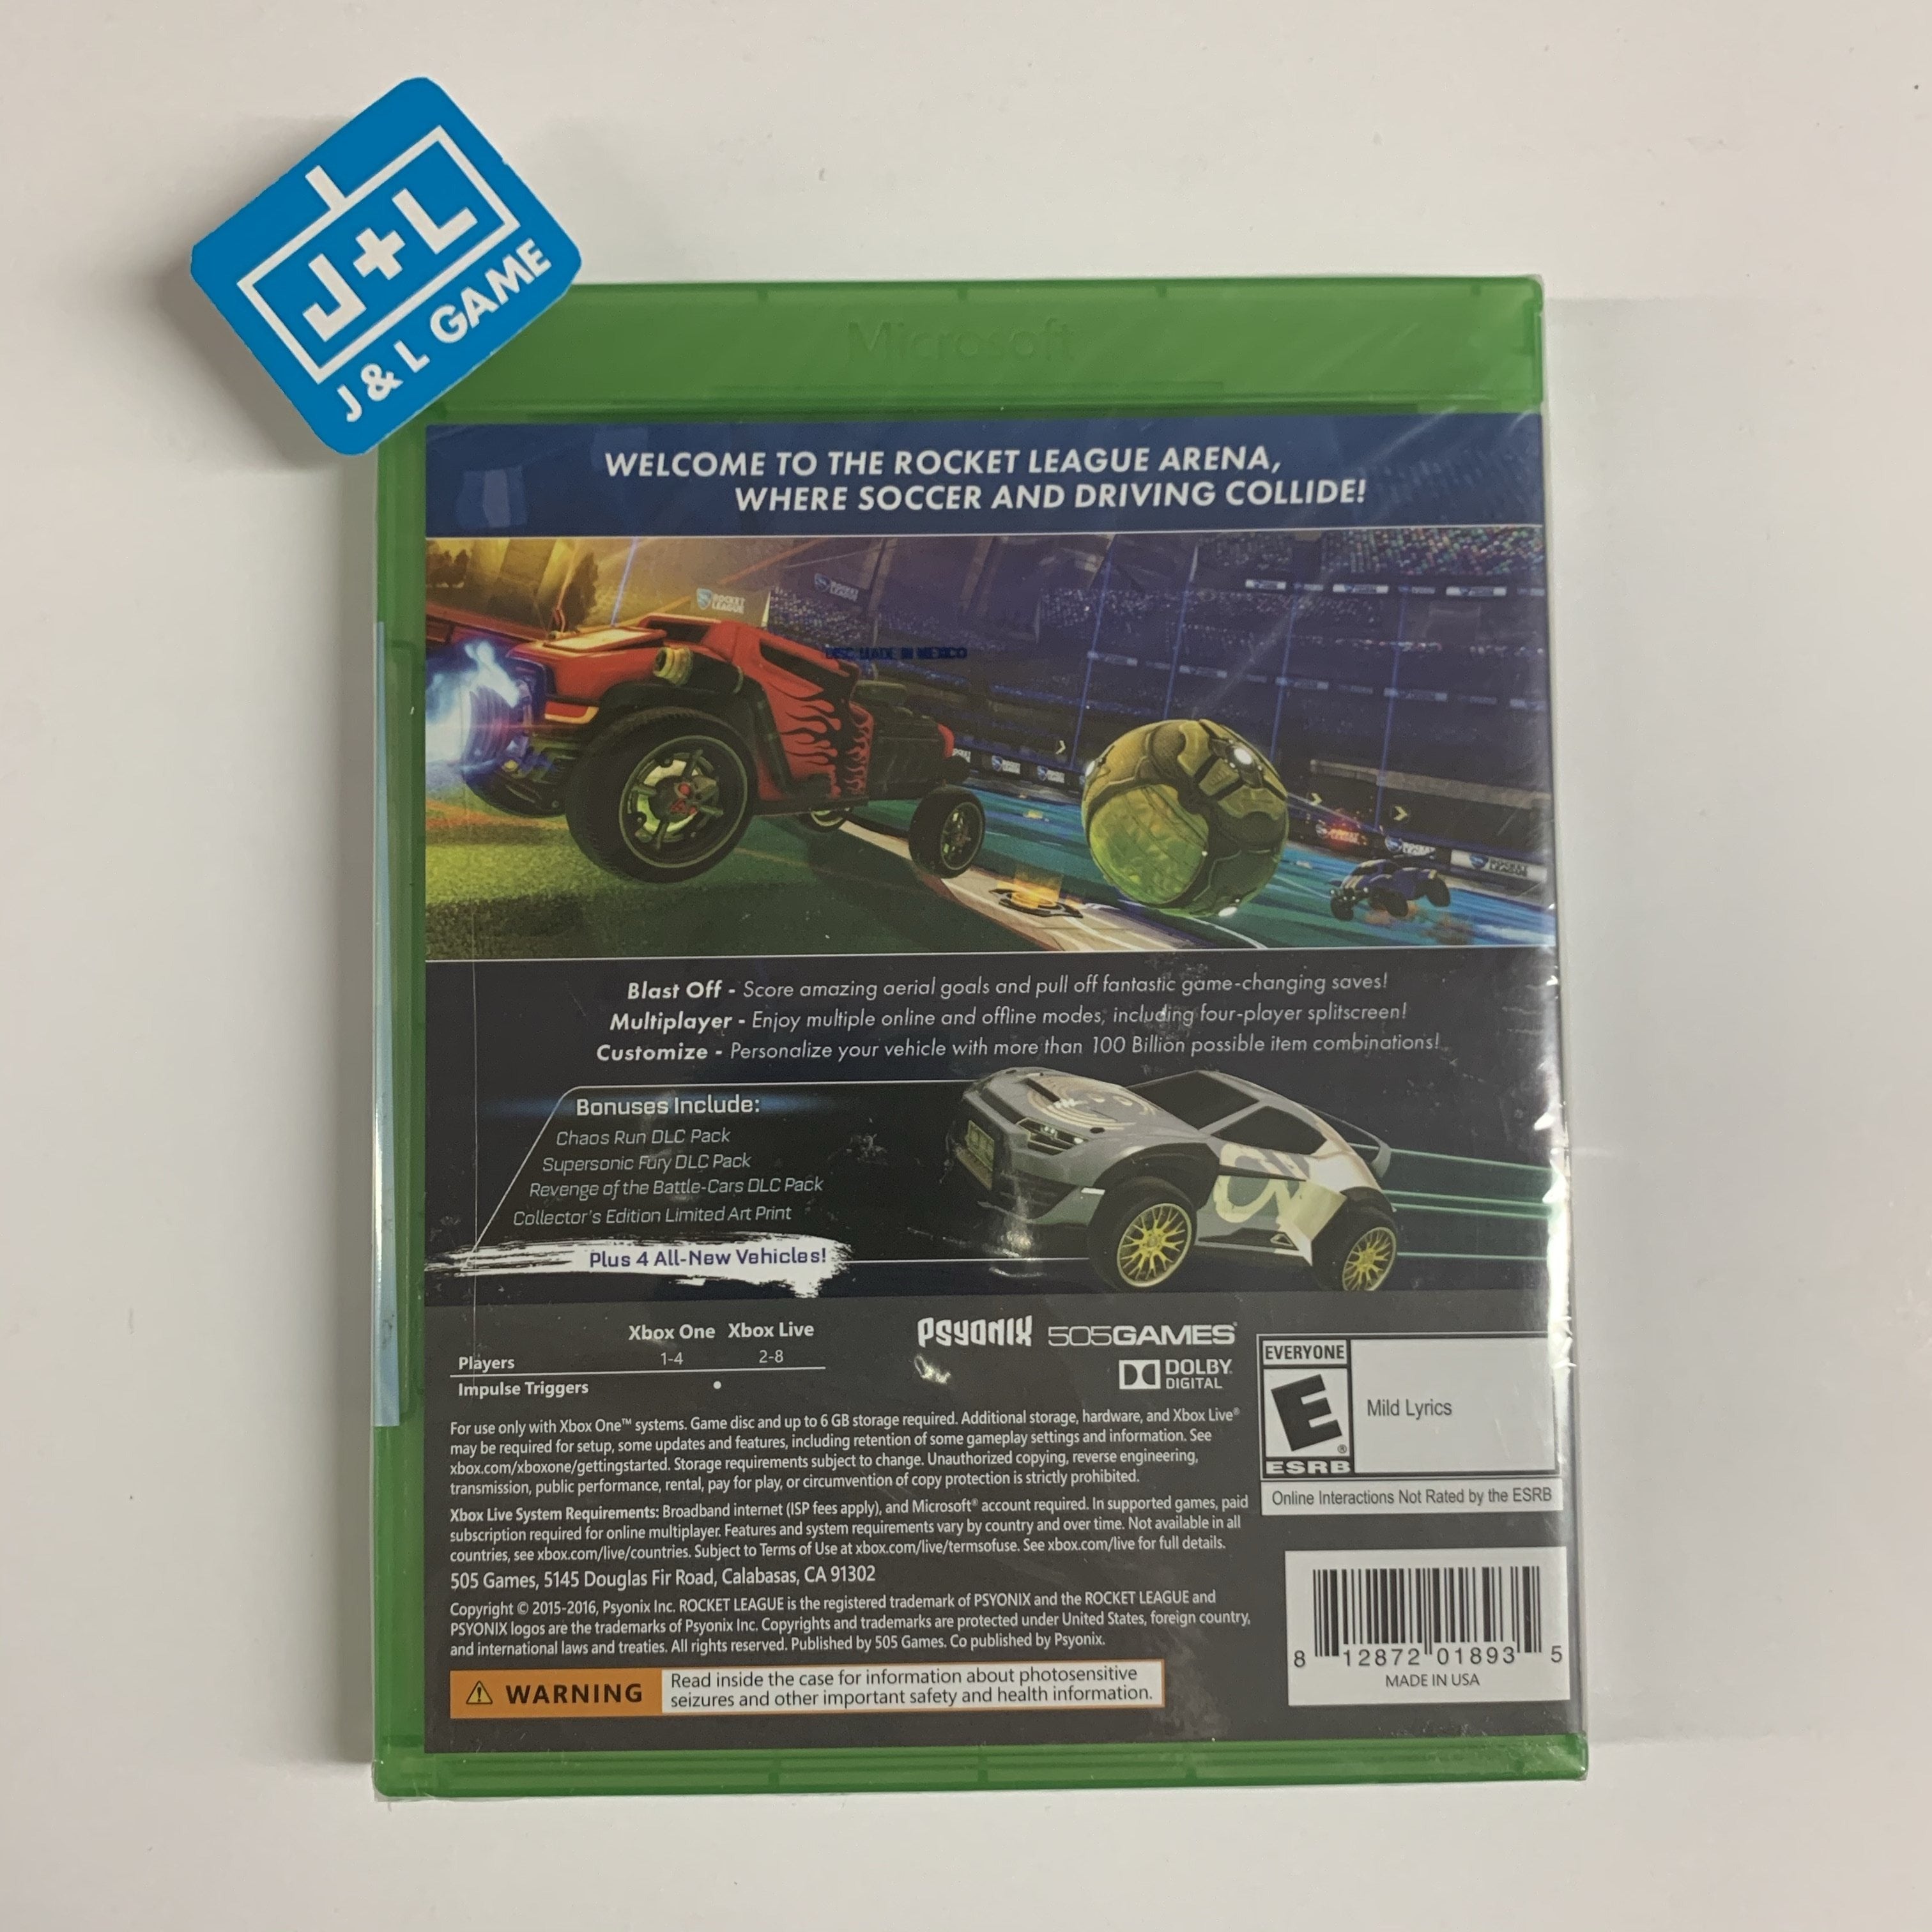 Rocket League (Collector's Edition) - (XB1) Xbox One Video Games 505 Games   